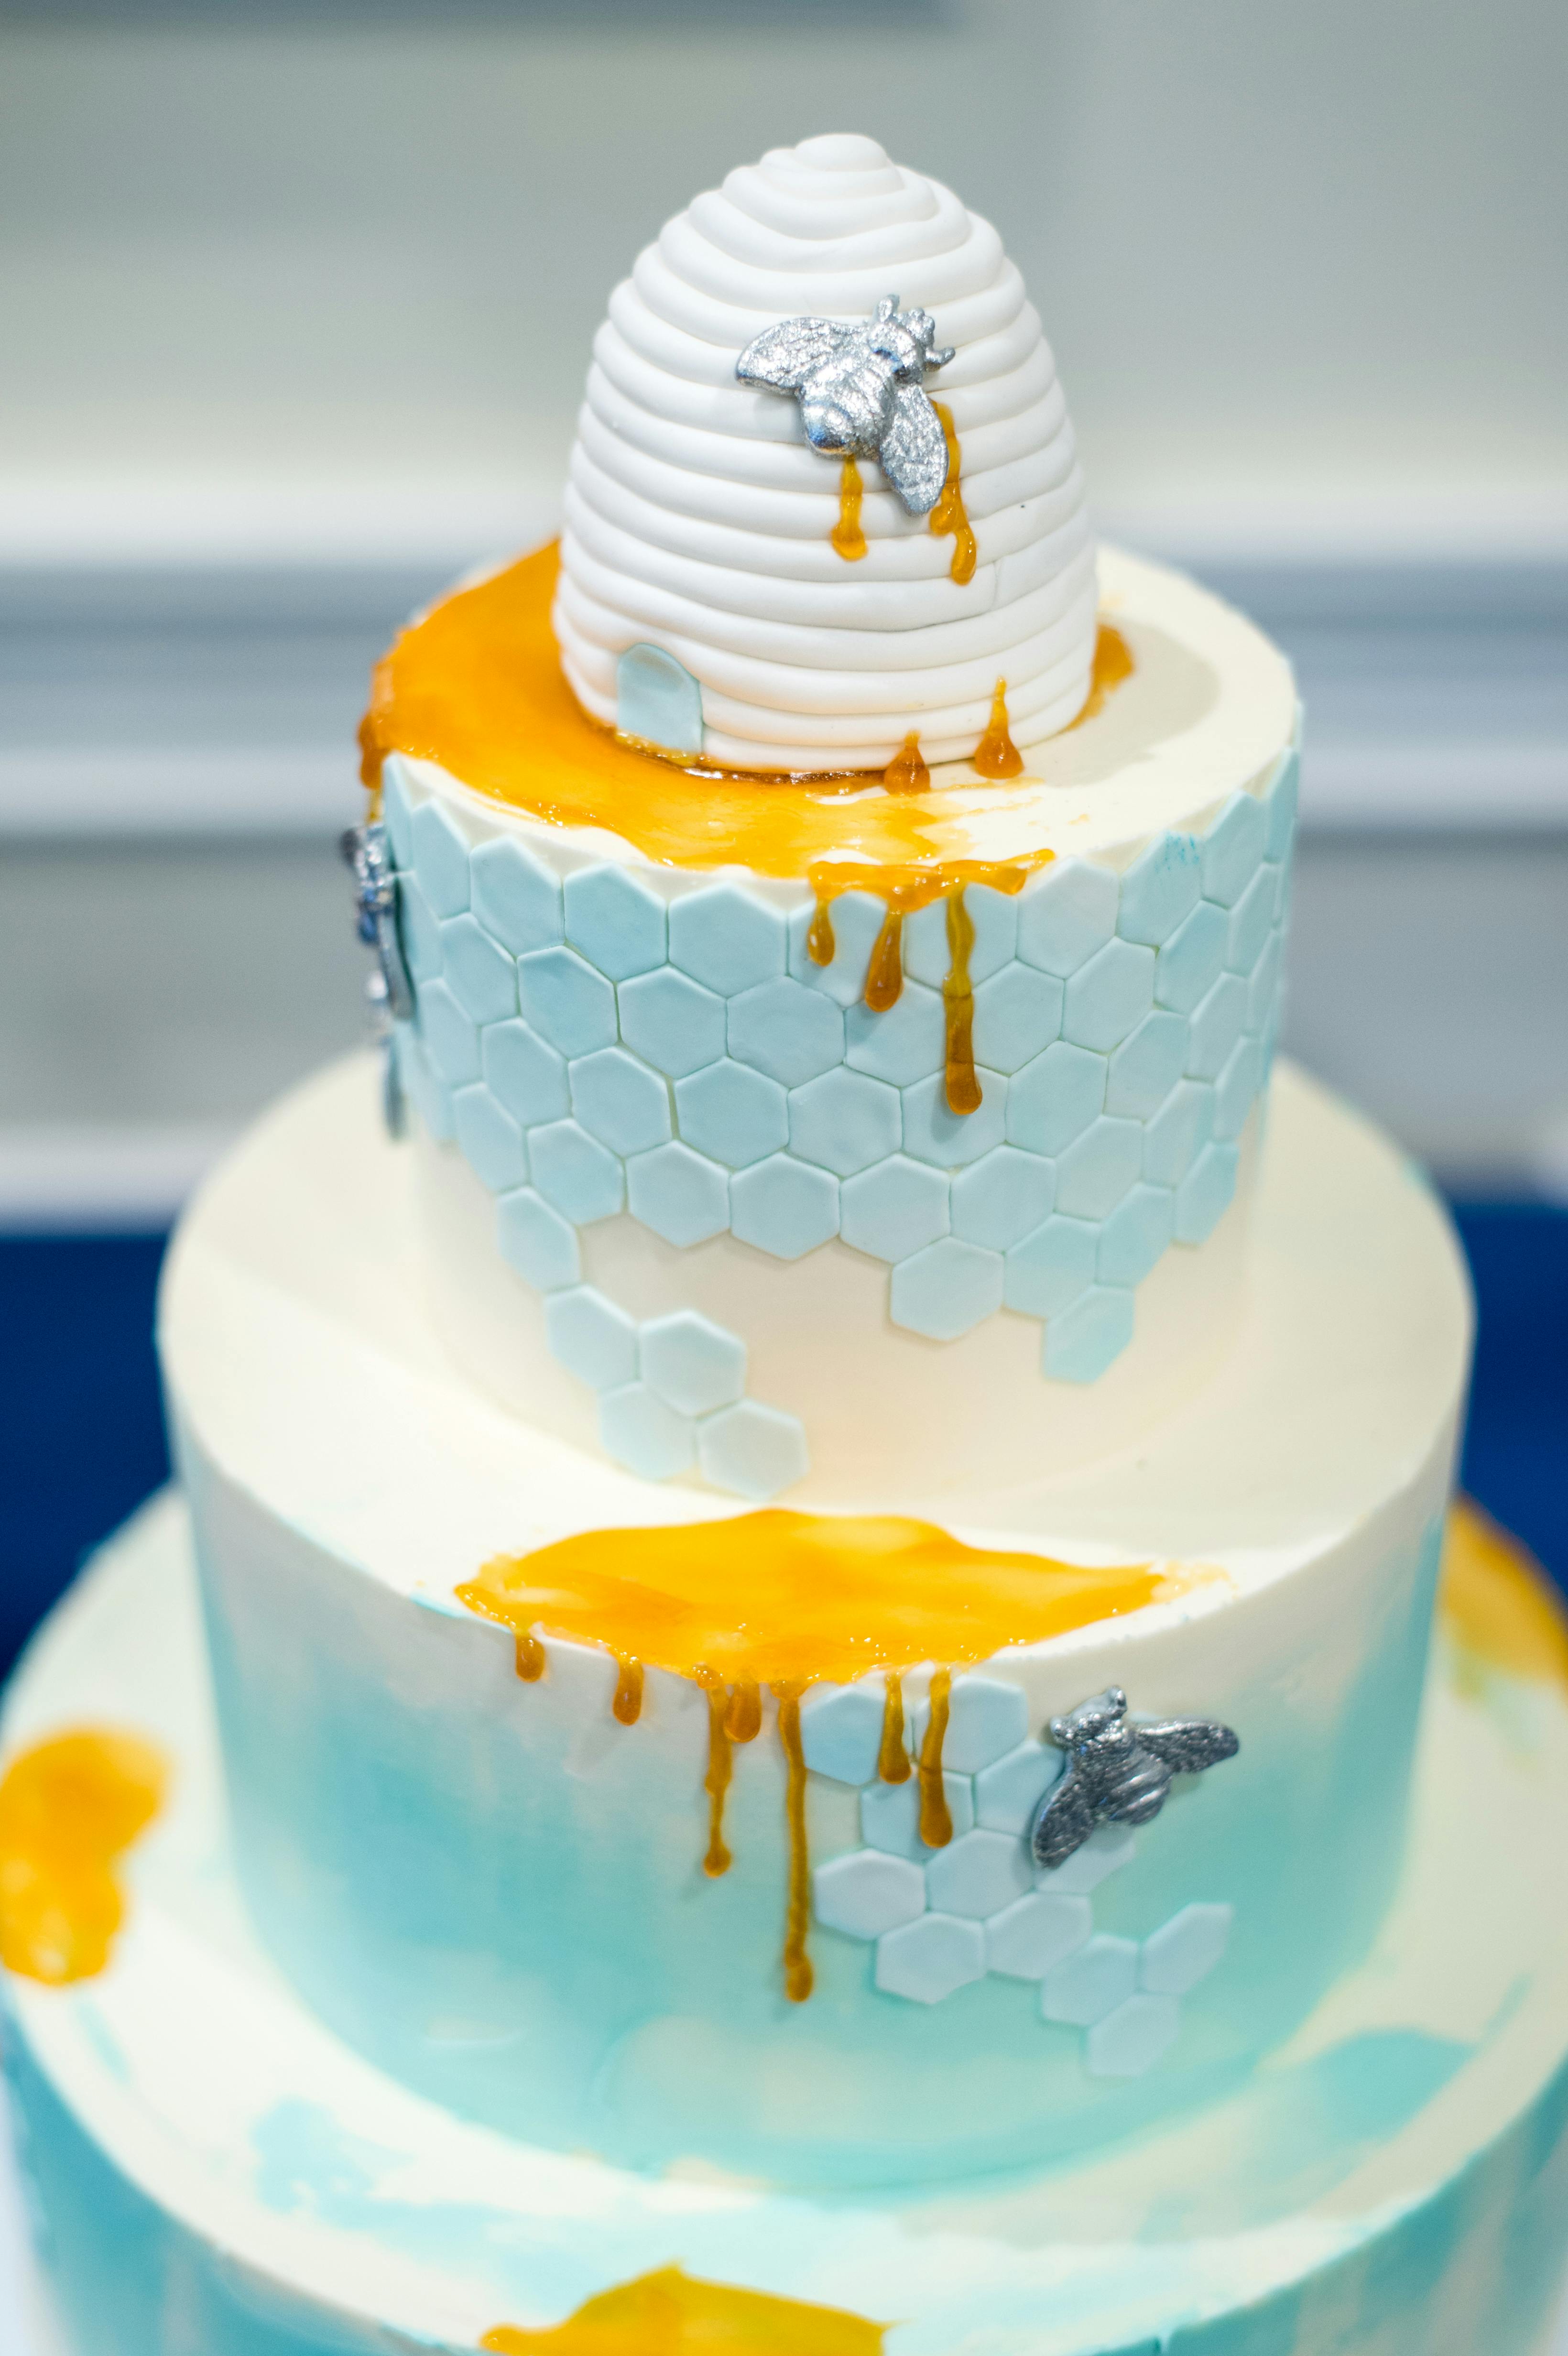 baby shower tiered cake with honeycomb details and dripping honey-like icing | PartySlate